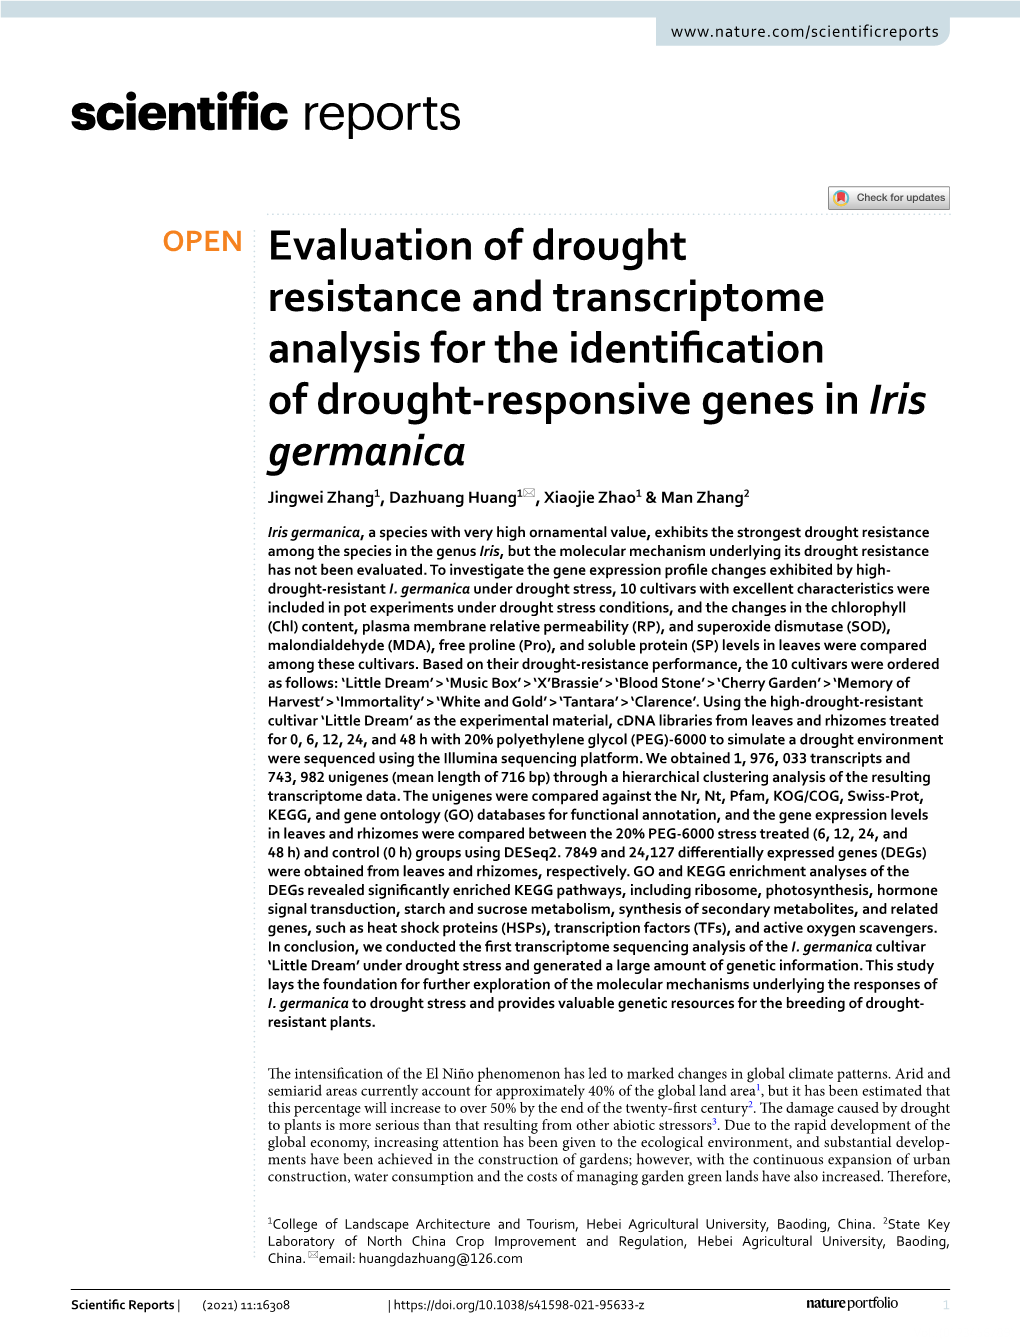 Evaluation of Drought Resistance and Transcriptome Analysis For